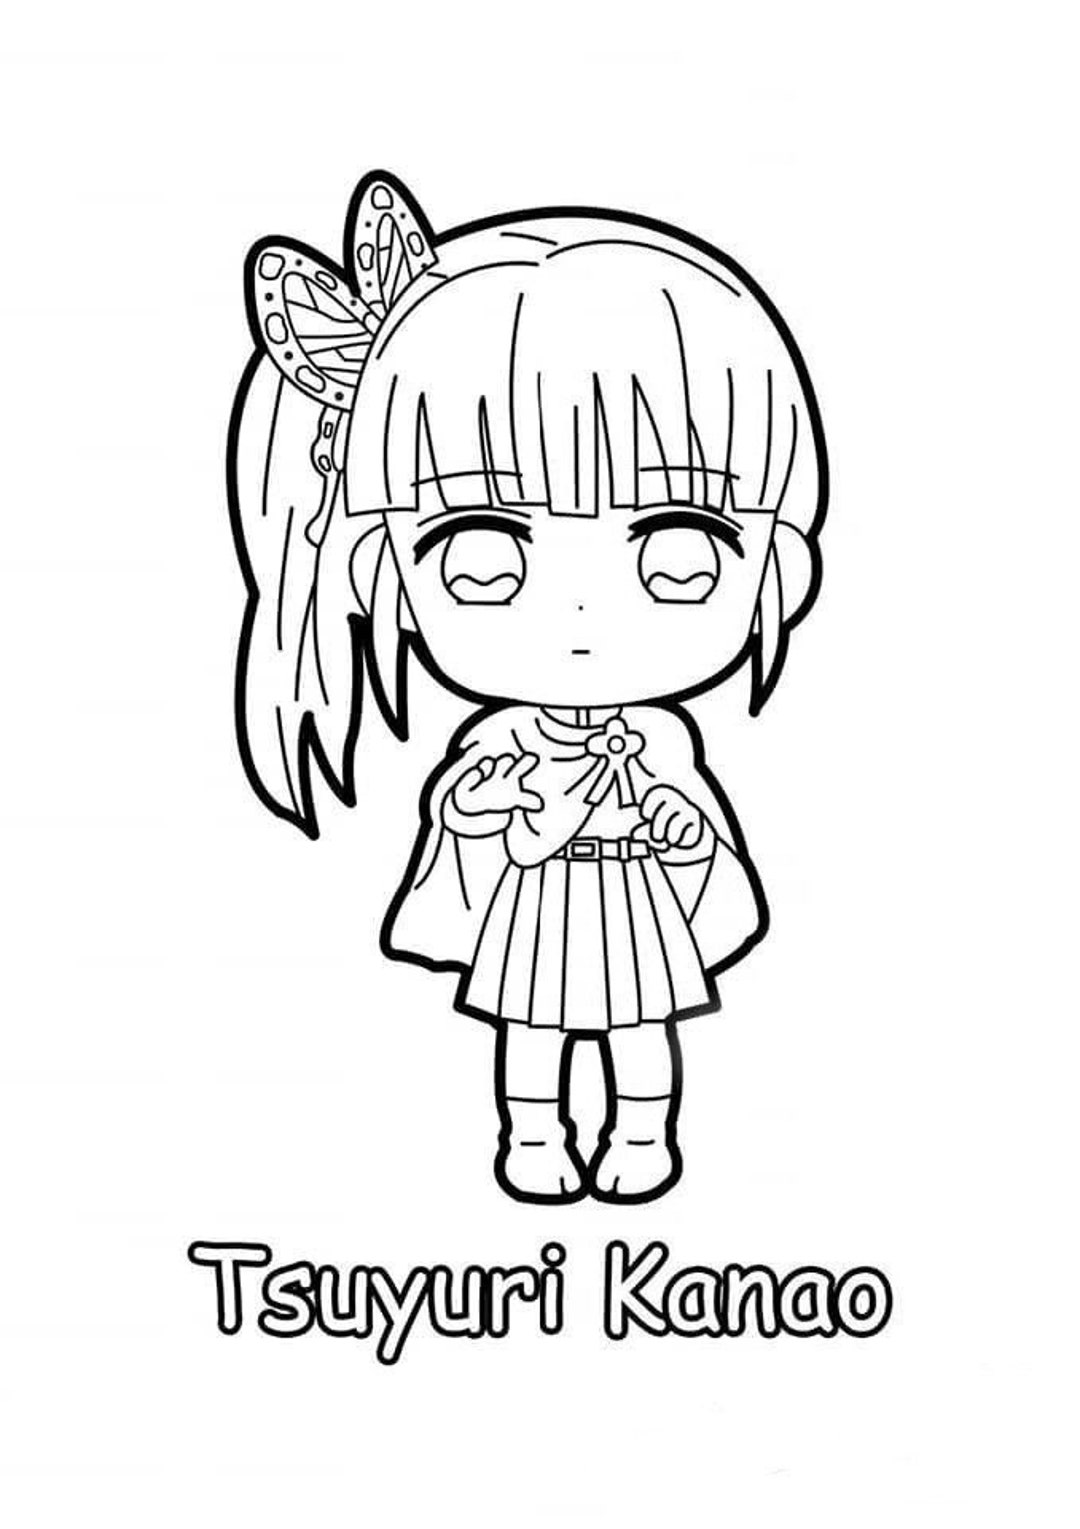 Kanao Coloring Page - Etsy